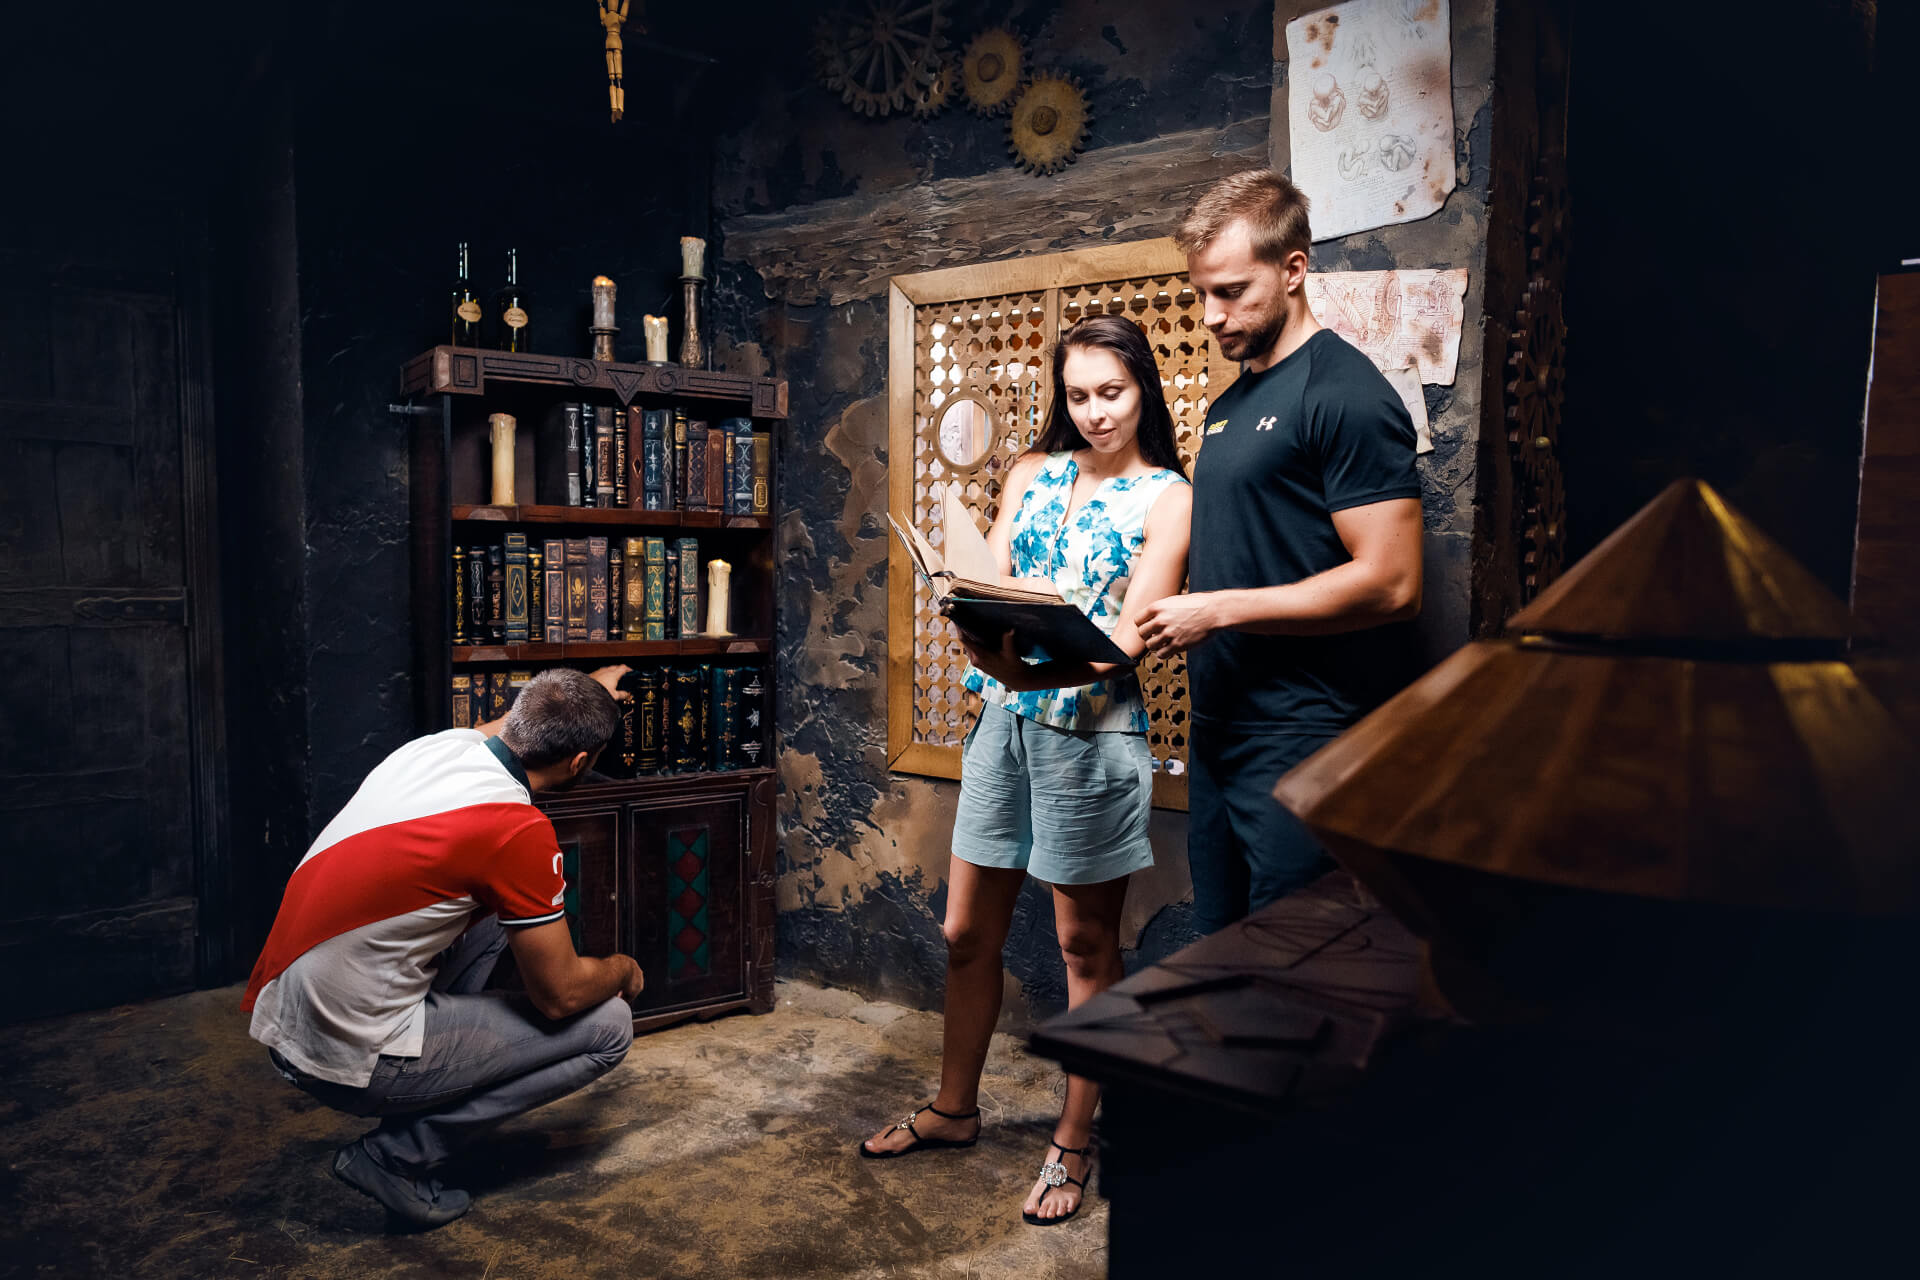 Drive productivity to new heights! Explore how thrilling escape room adventures can revitalize your staff's passion for excellence.